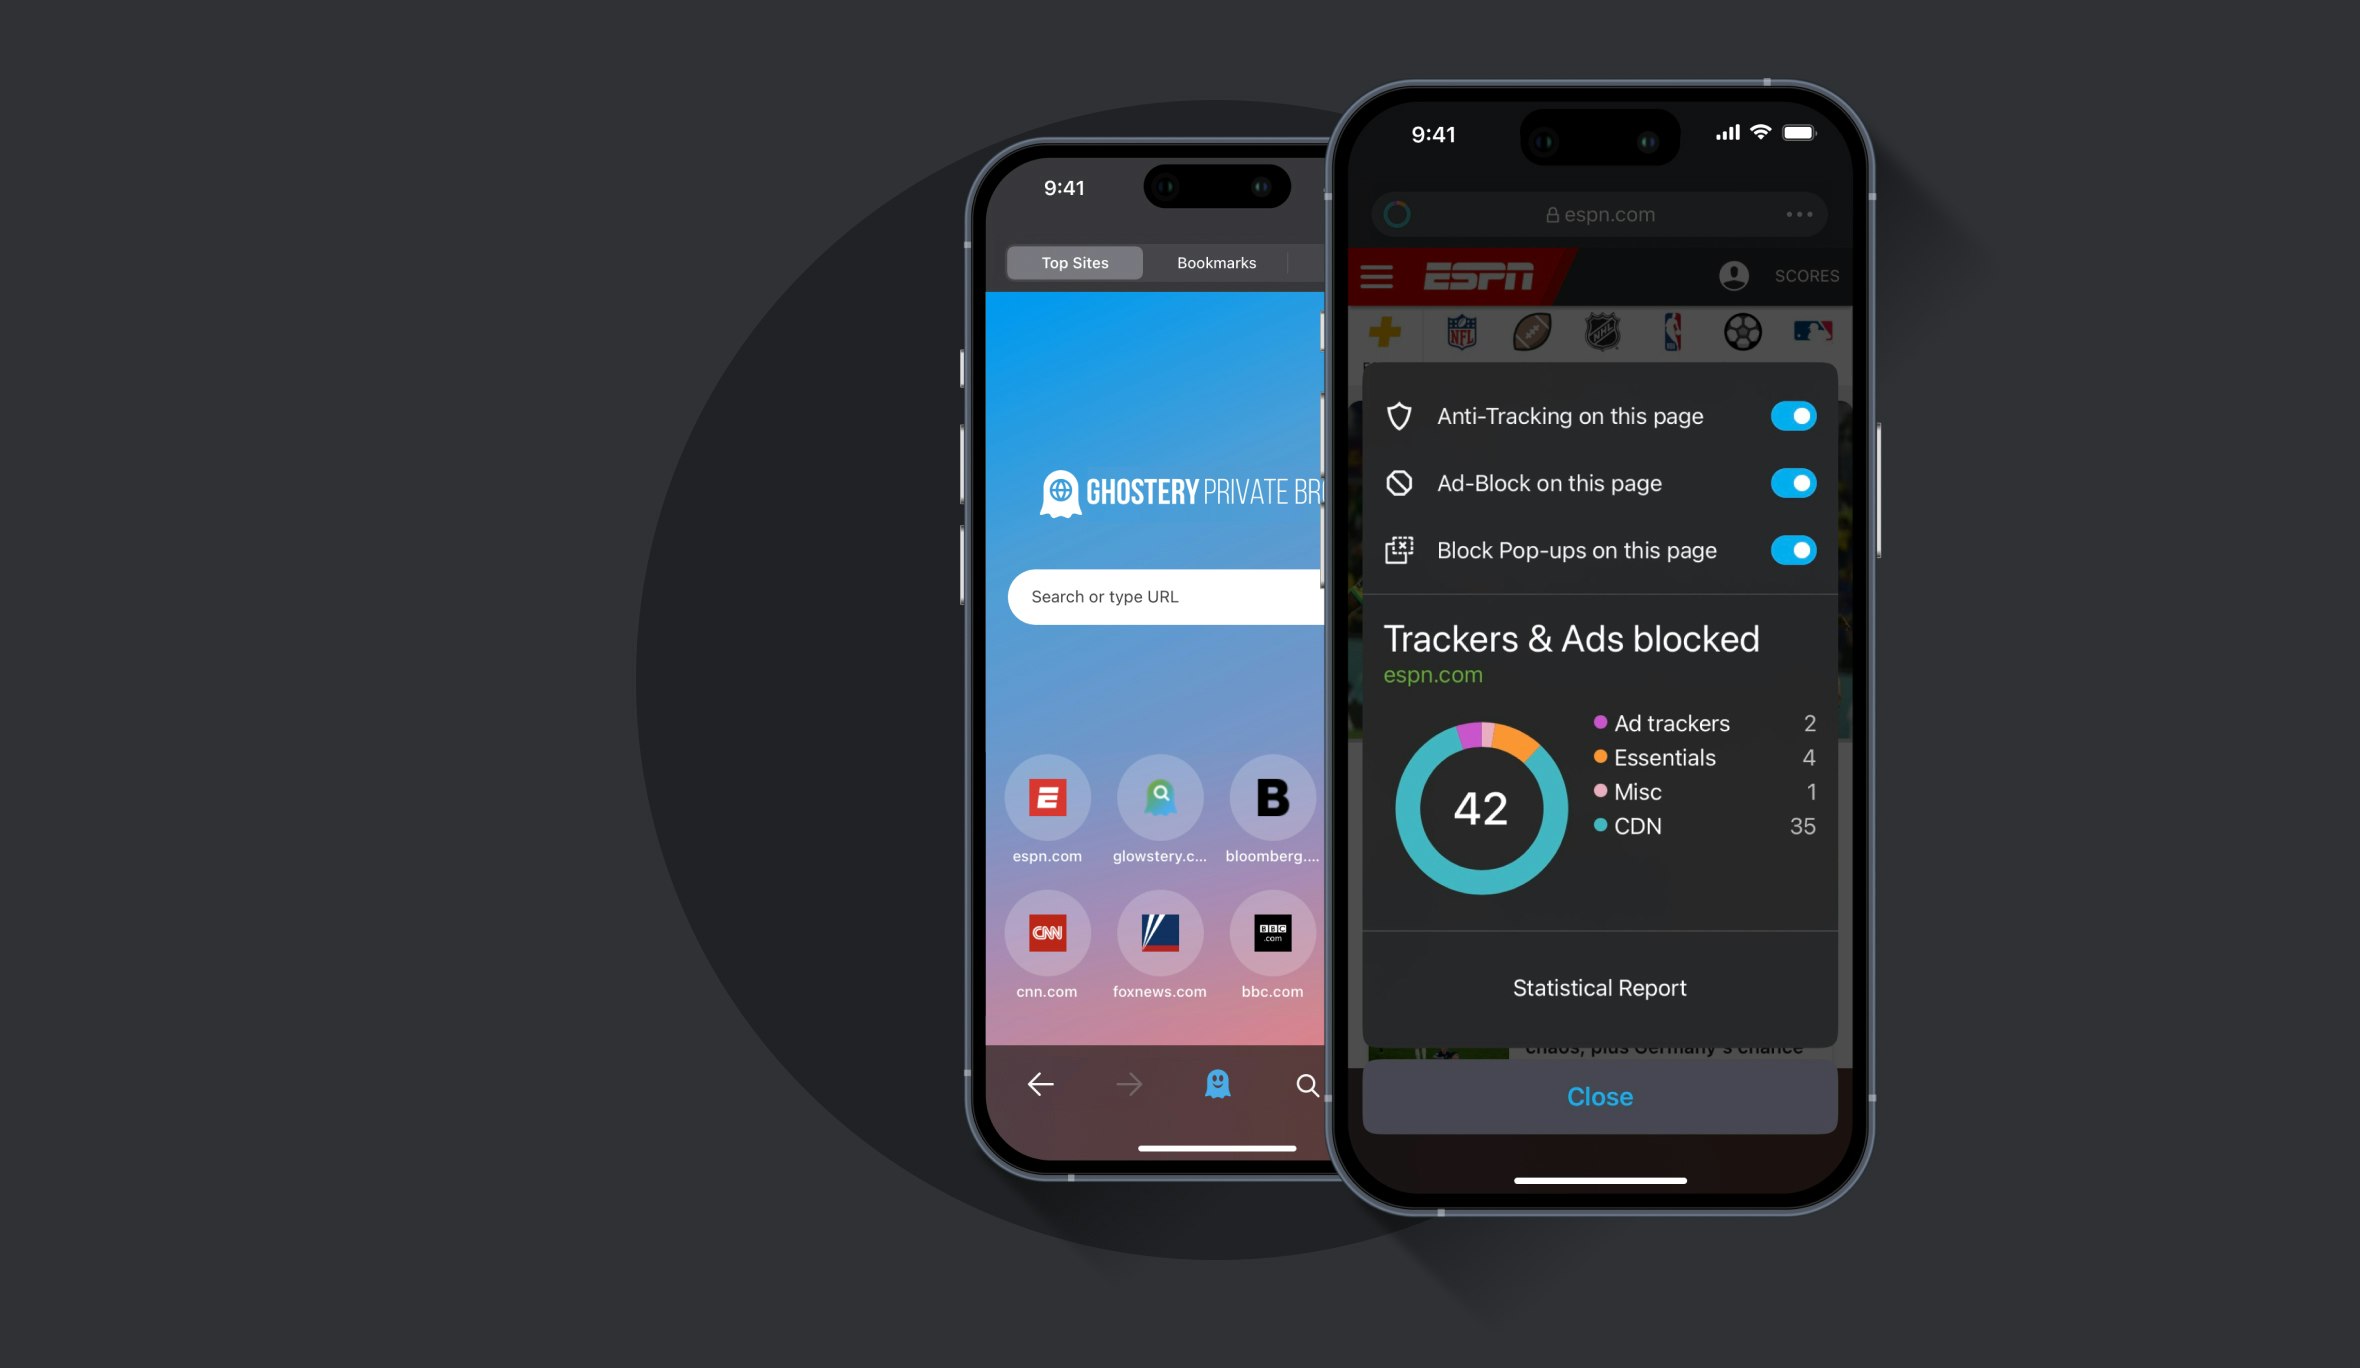 Ghostery Private Browser displayed with open settings on iPhone